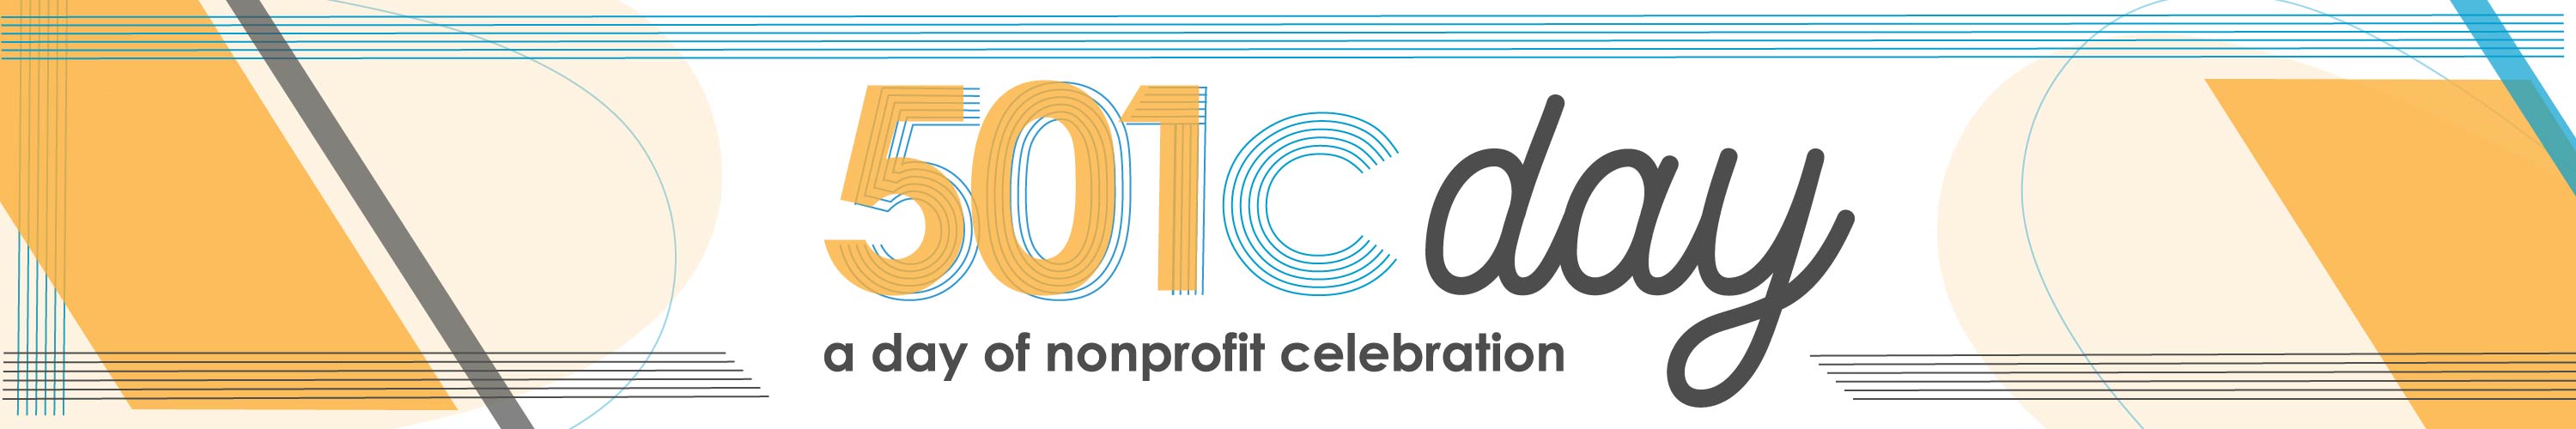 A banner with gold, blue, and gray coloring. With the words 501c Day written at the top in a logo format, and 'A Day of Nonprofit Celebration' written underneath the logo.